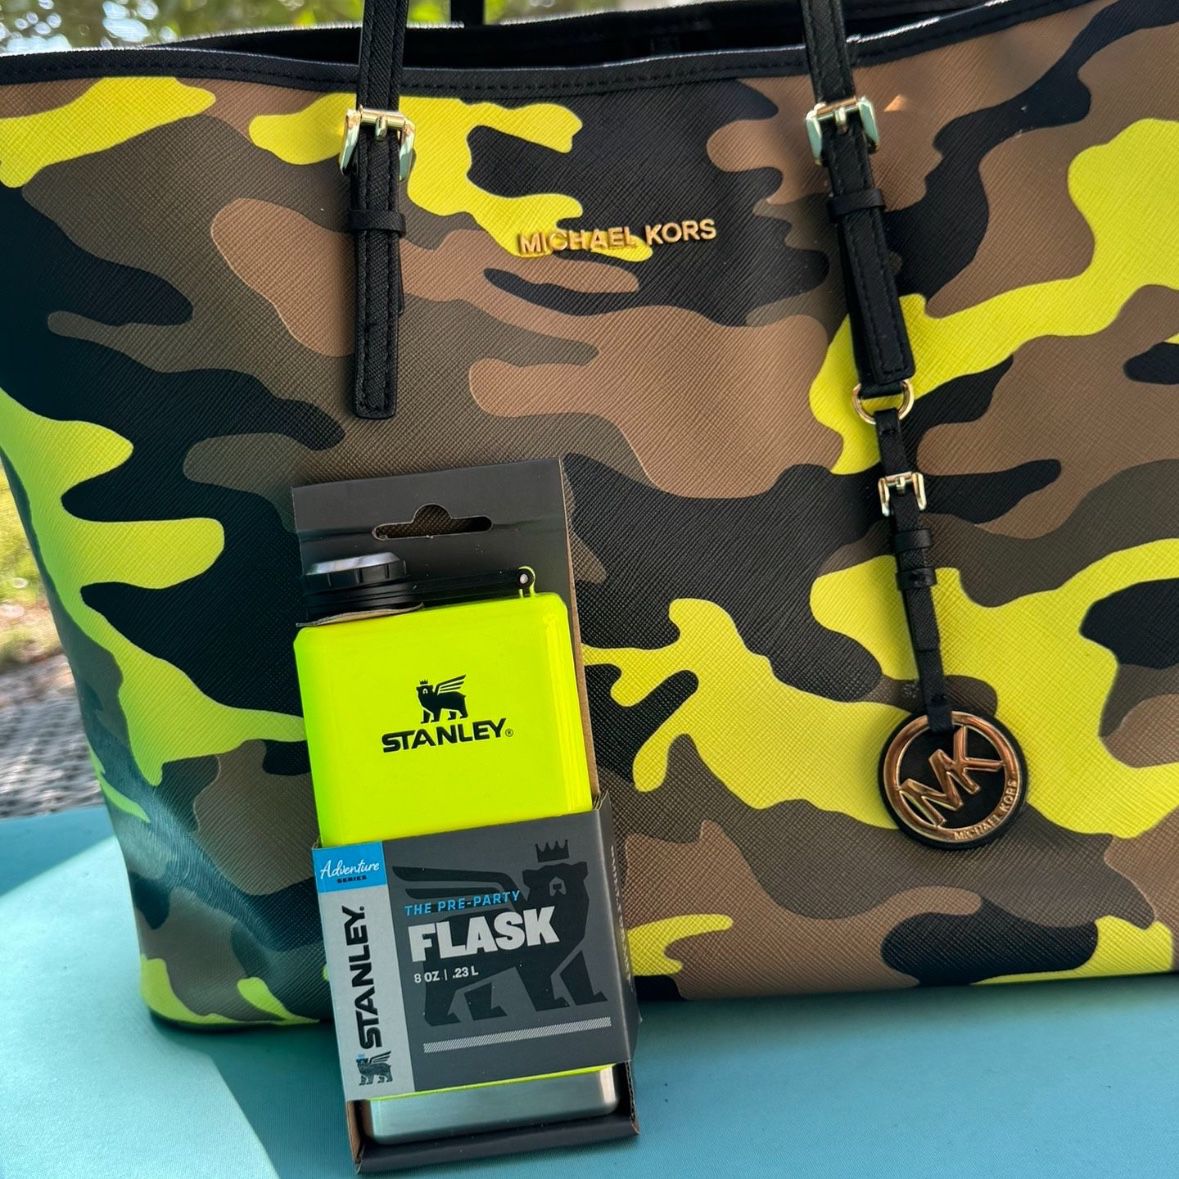 Michael Kors Tote Bag Camouflage & Free Stanley flask 💫